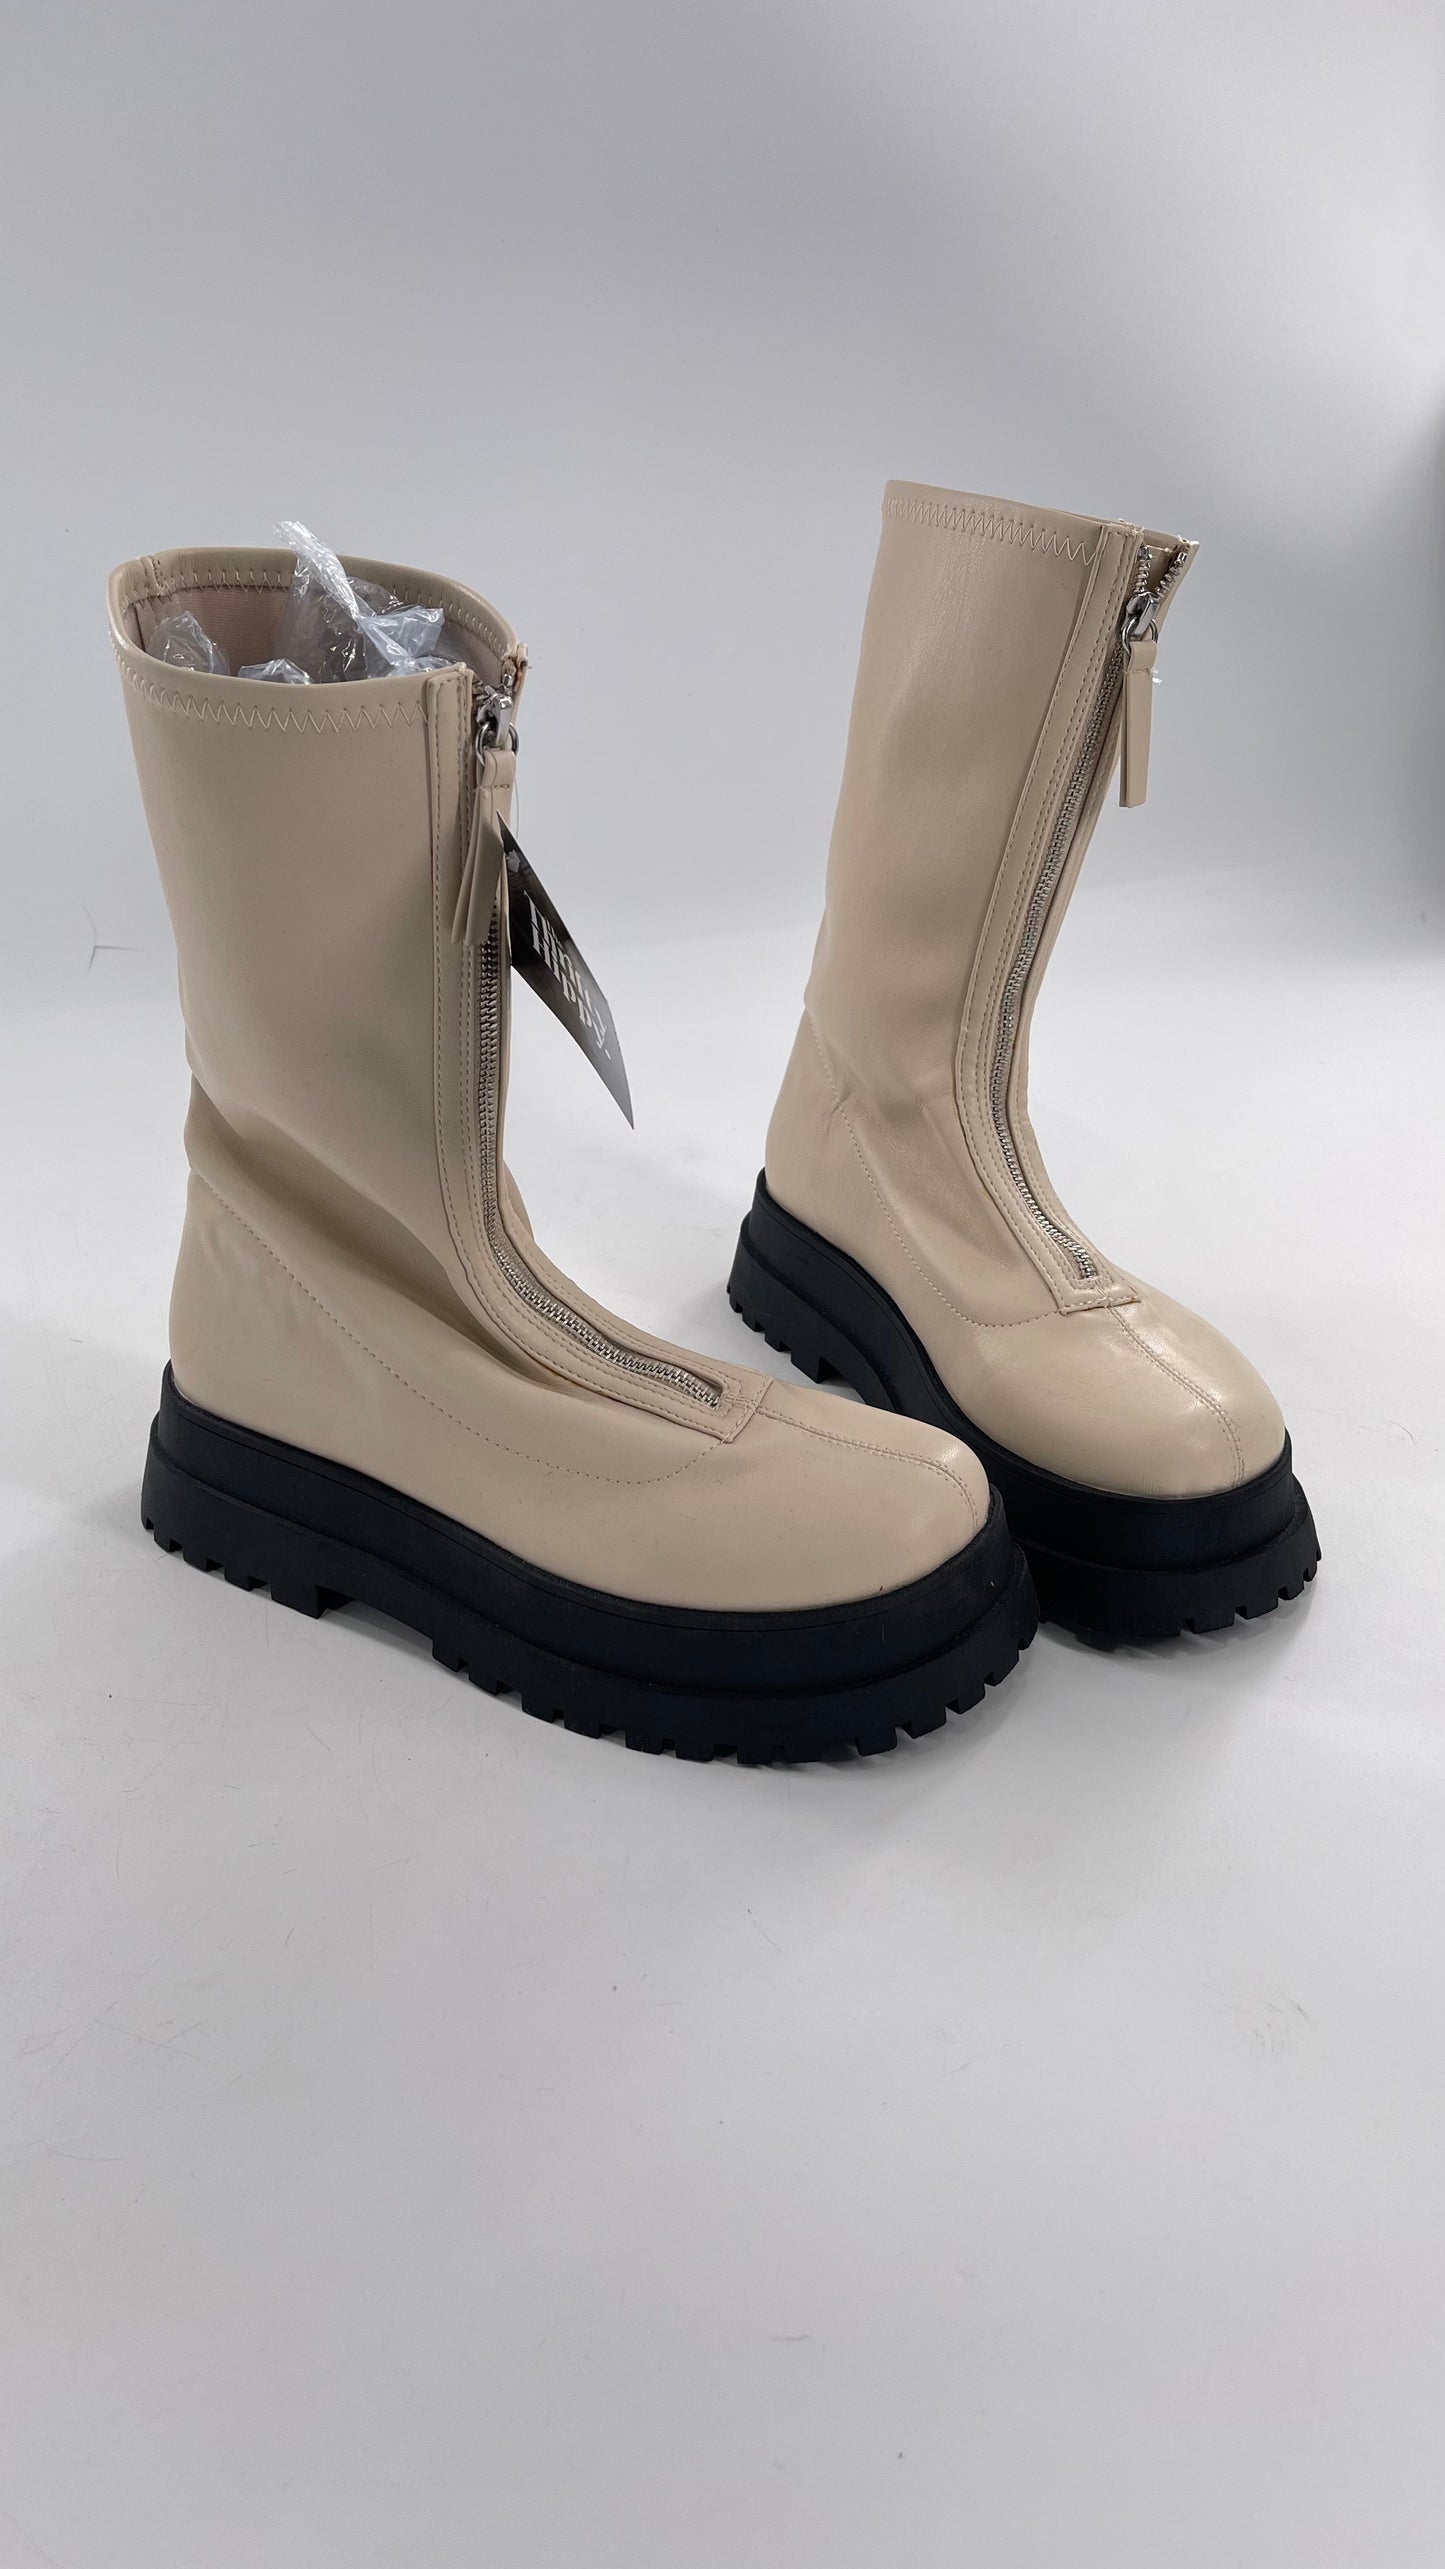 Urban Outfitters Cream Zip Front Boot with Contrast Platform (10)